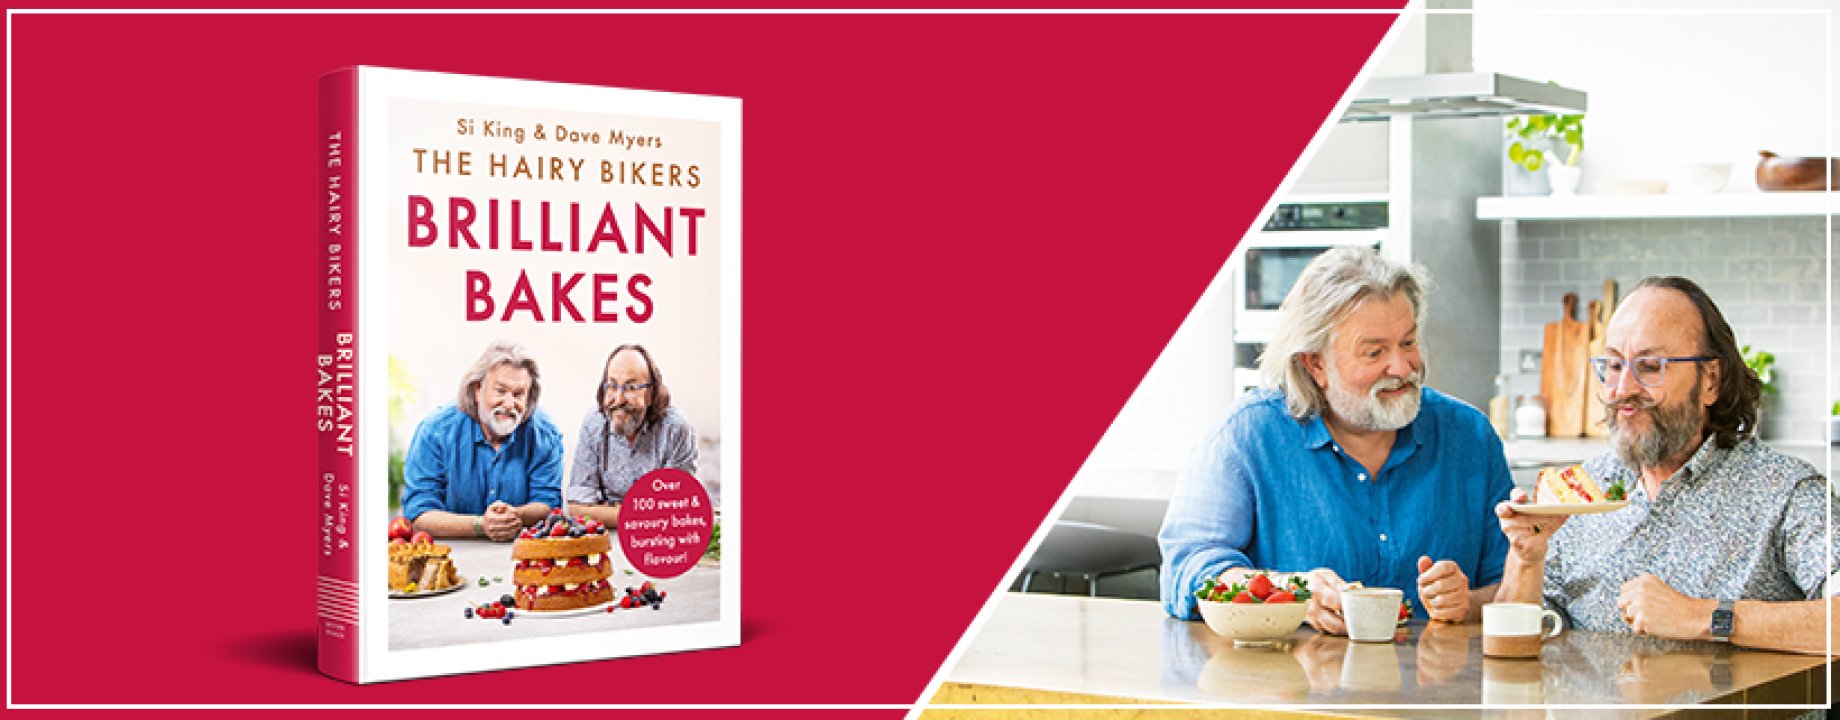  The Hairy Bikers’ Brilliant Bakes by The Hairy Bikers, thebookchart.com